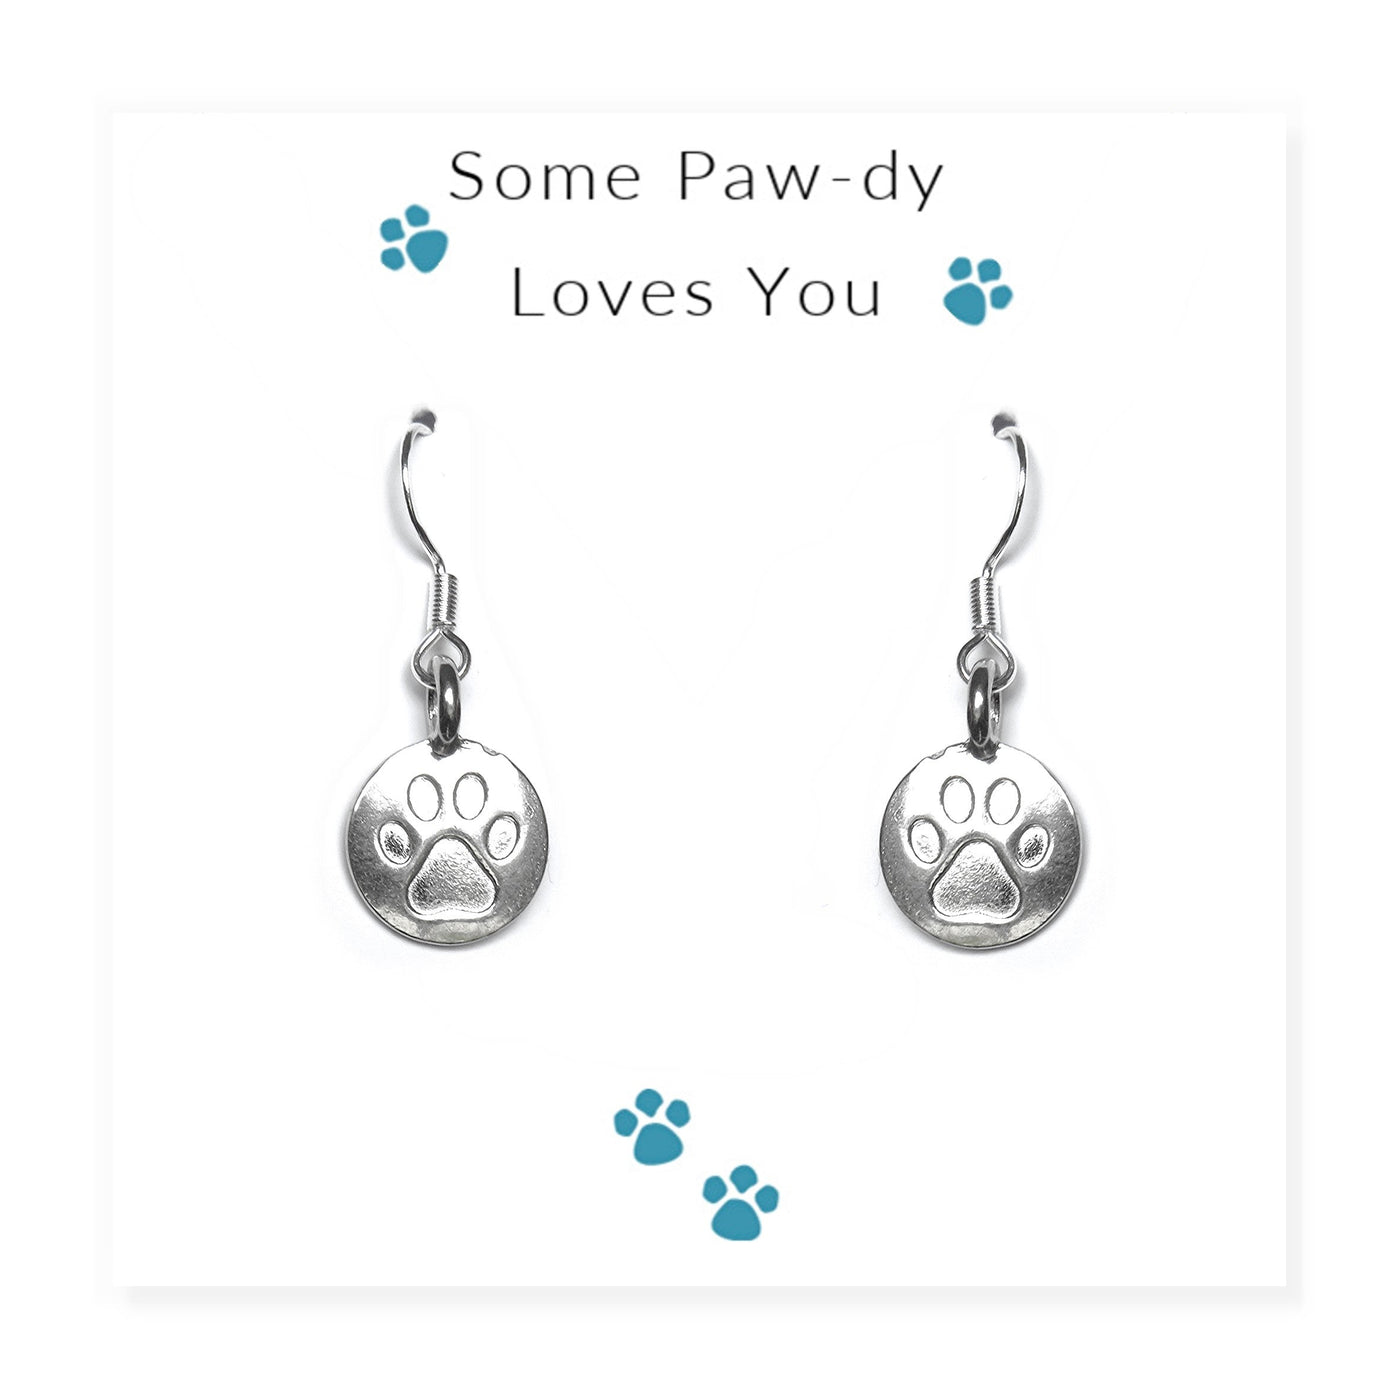 Some Paw-dy Loves You - Earrings on Message Card